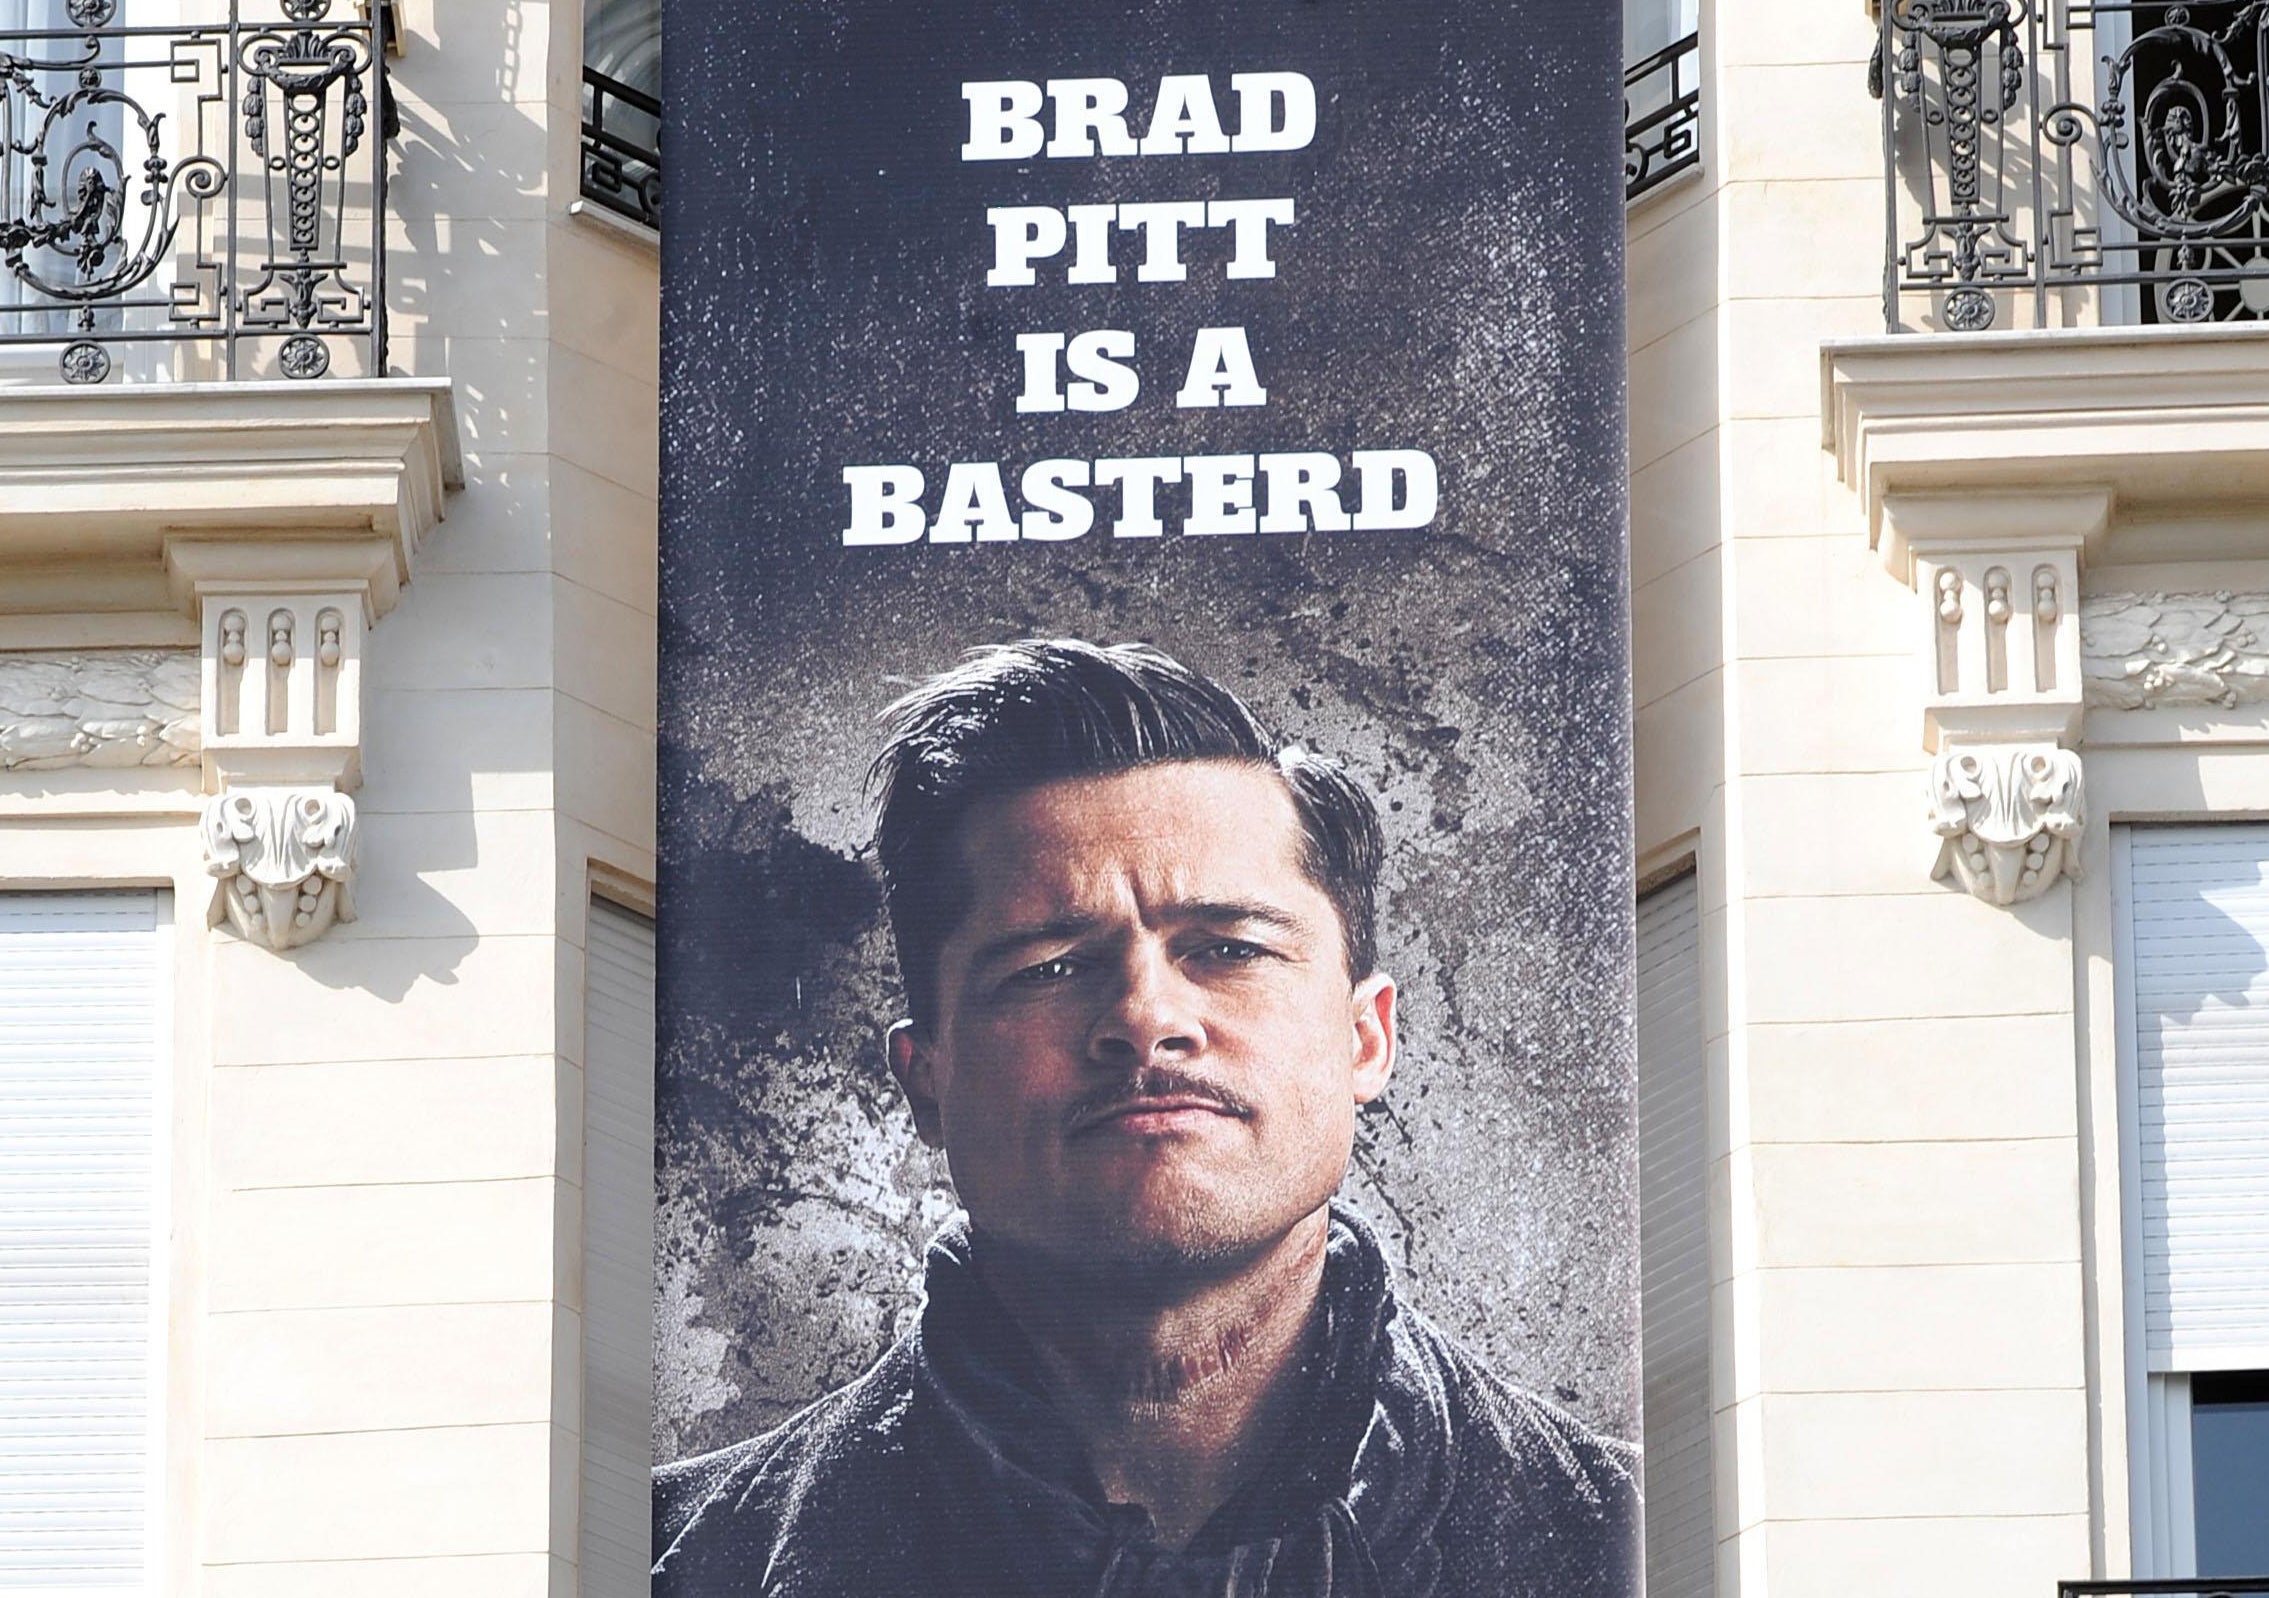 Promotional poster featuring Brad Pitt for Inglourious Basterds film